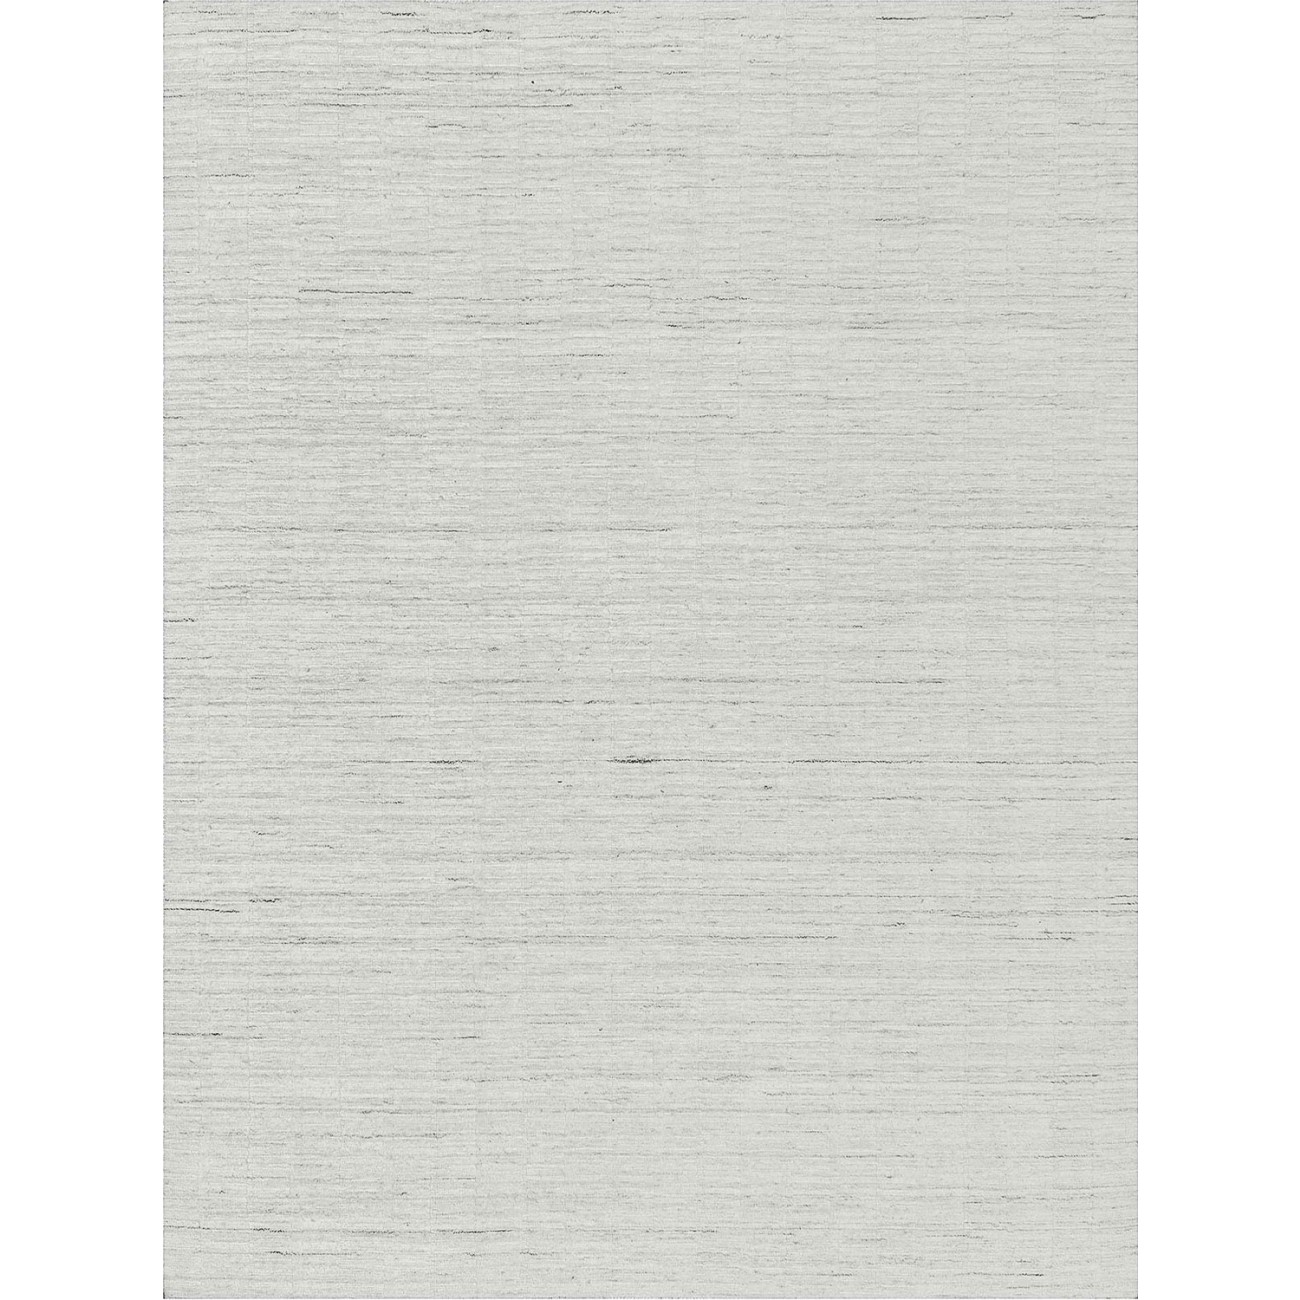 Tapete Tantra Natural - 200x250